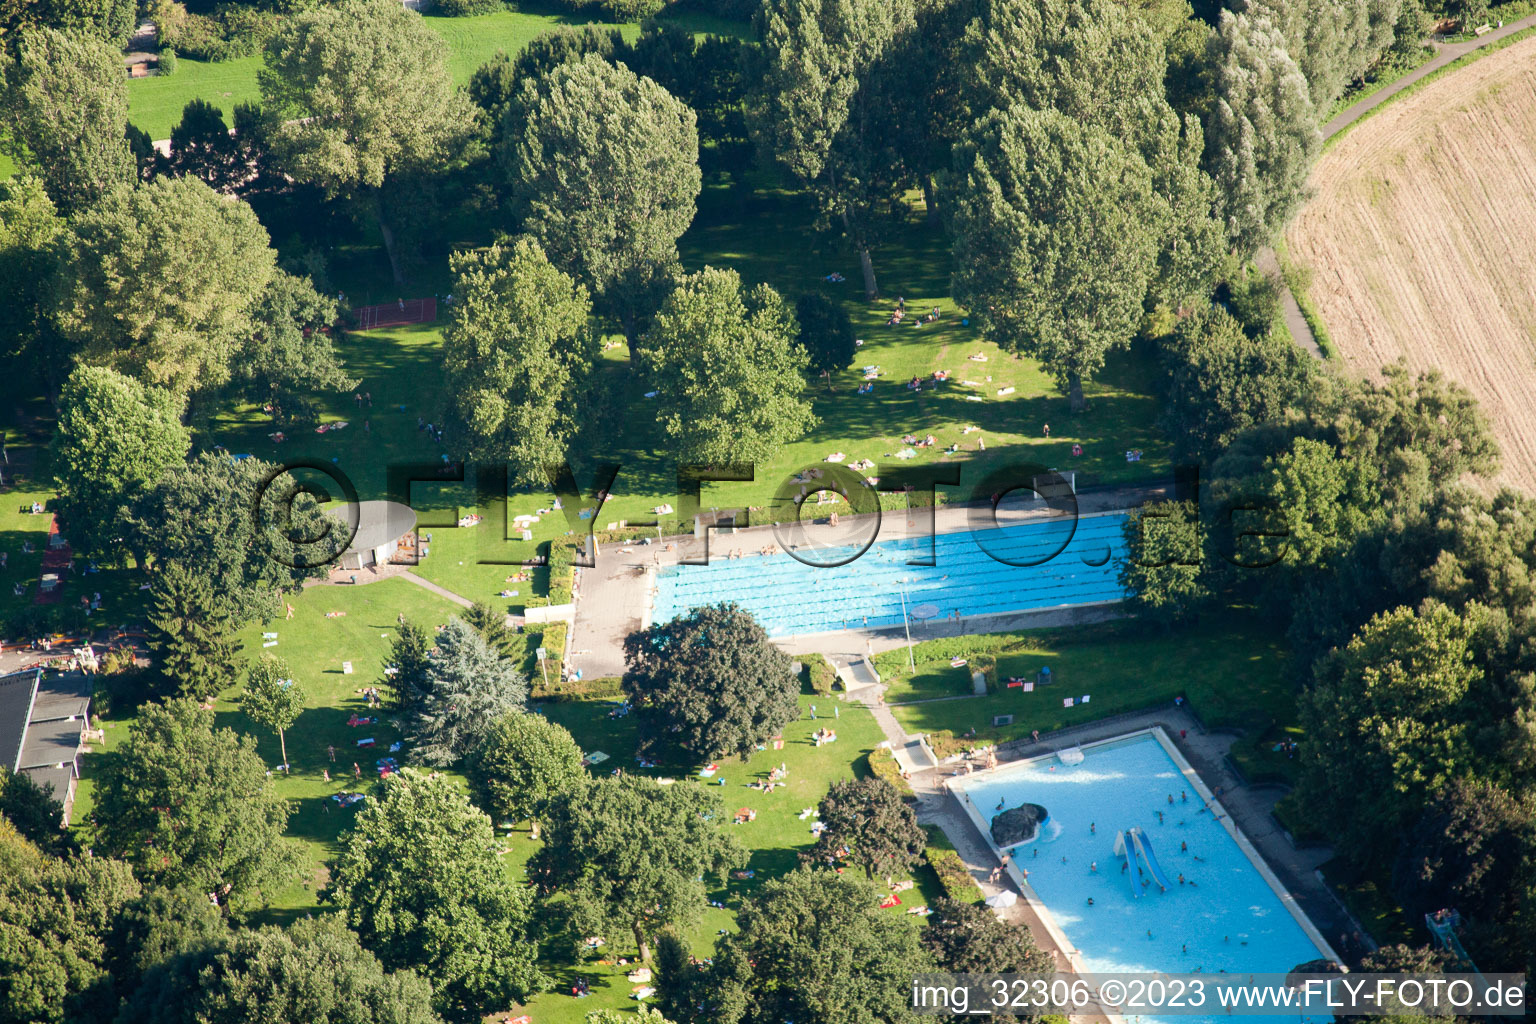 Aerial view of Rüppur, outdoor swimming pool in the district Rüppurr in Karlsruhe in the state Baden-Wuerttemberg, Germany